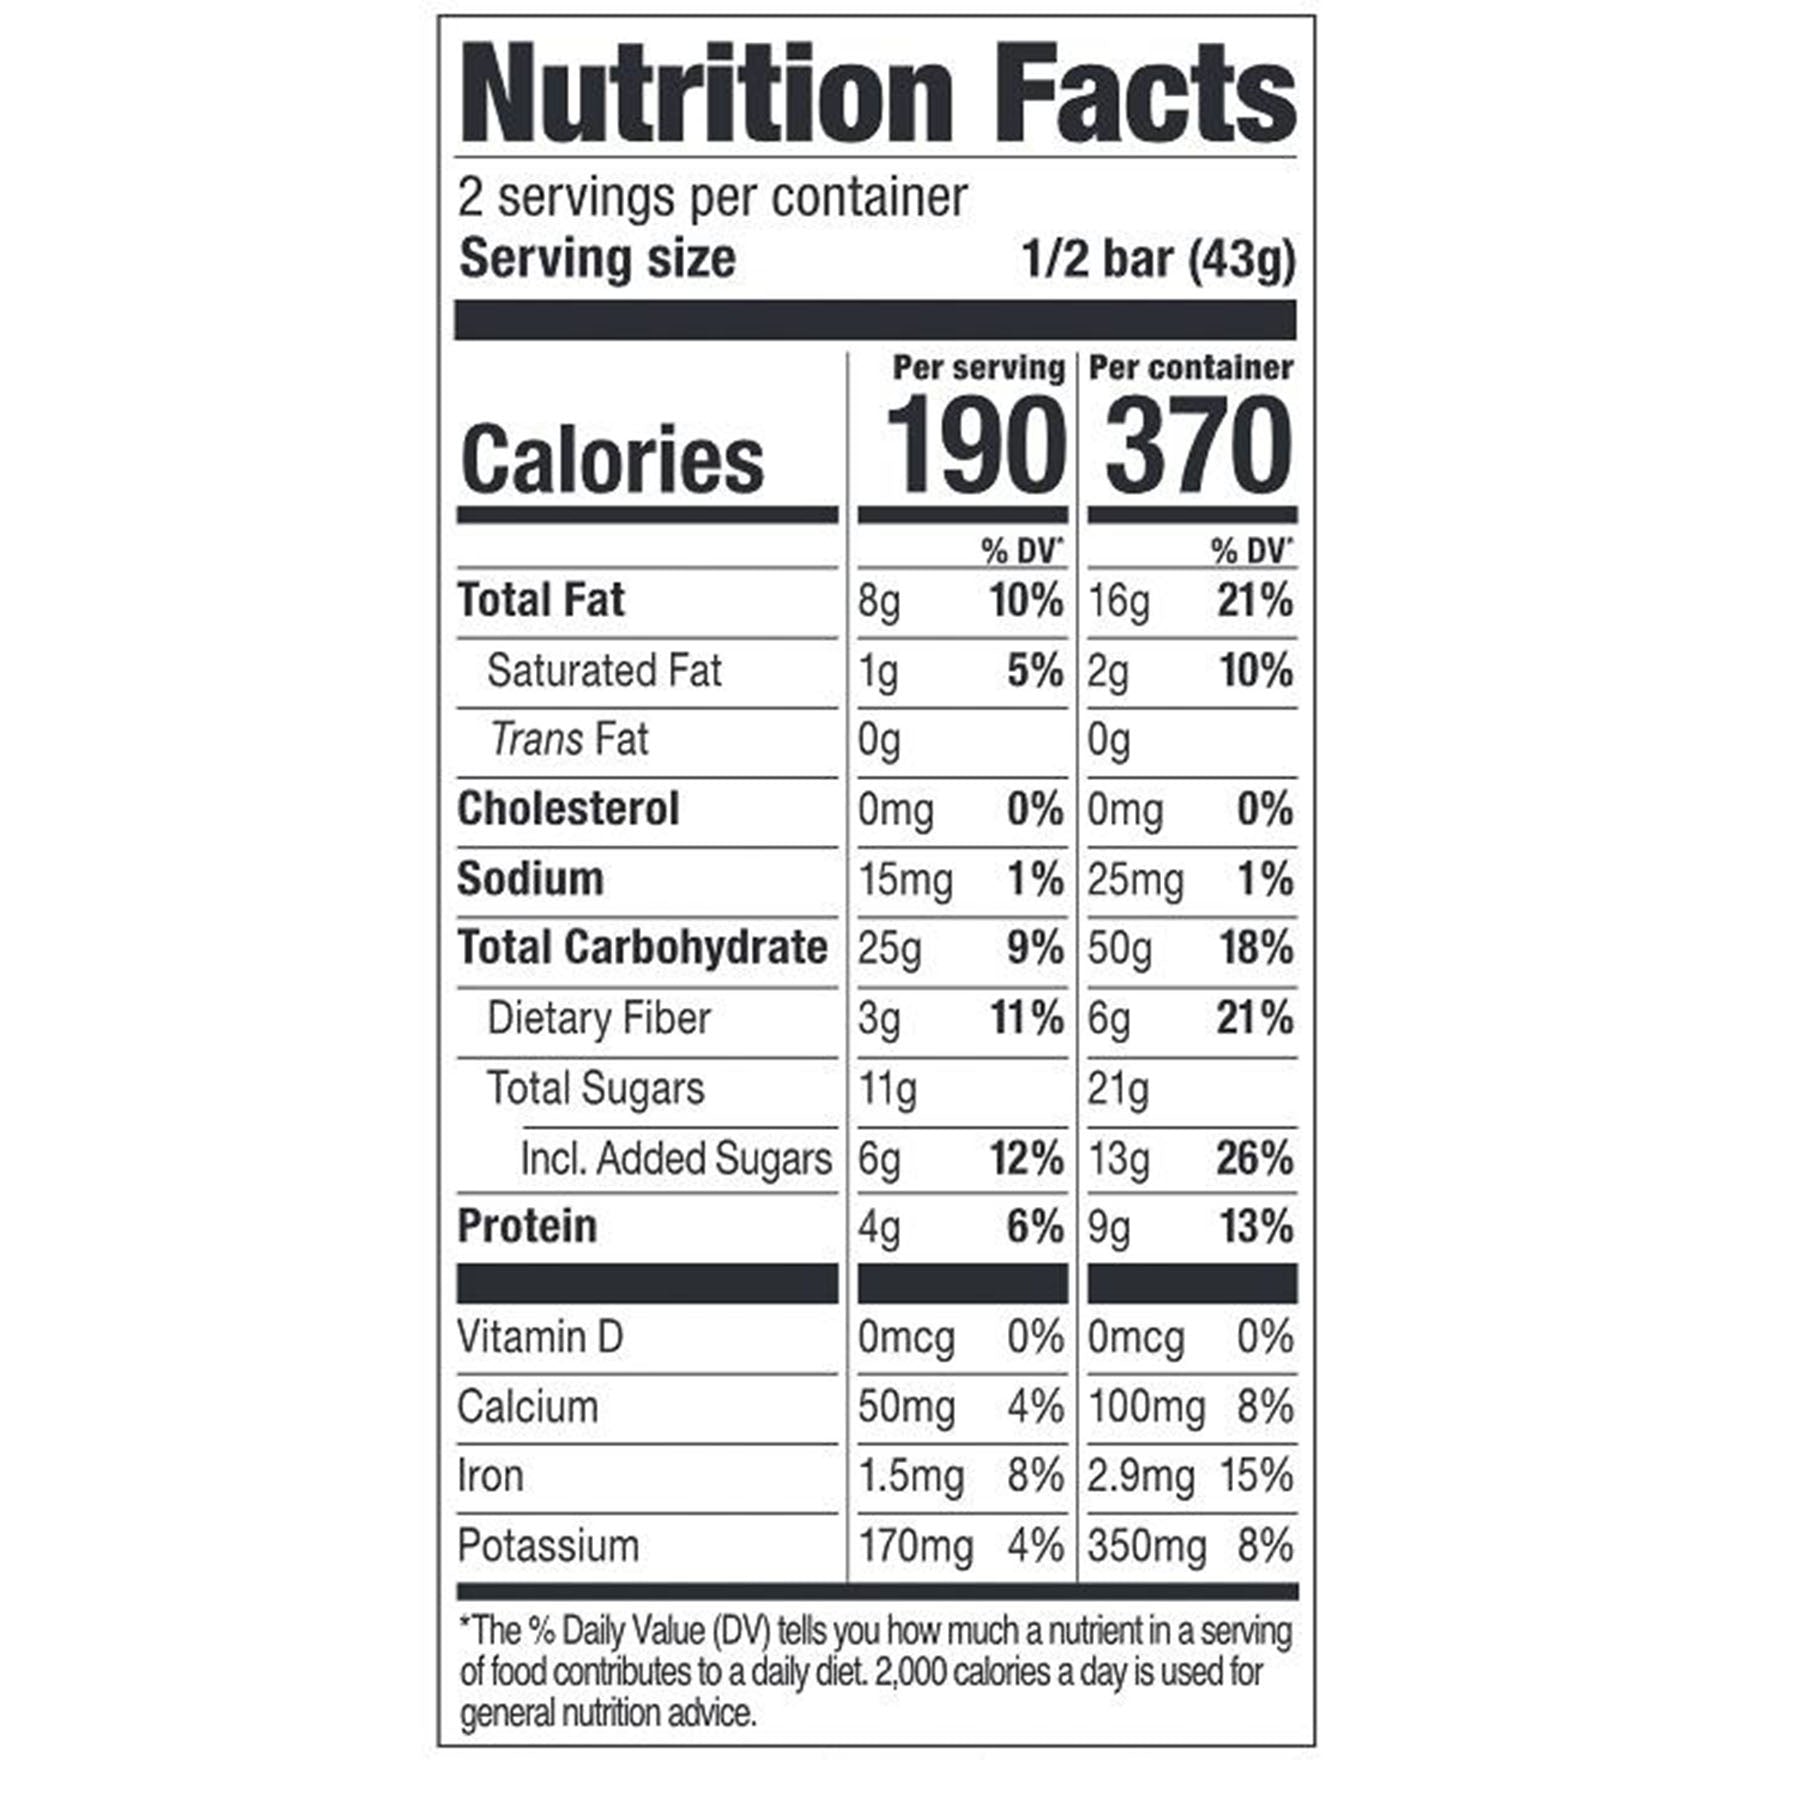 The nutrition label from the super berry and greens package